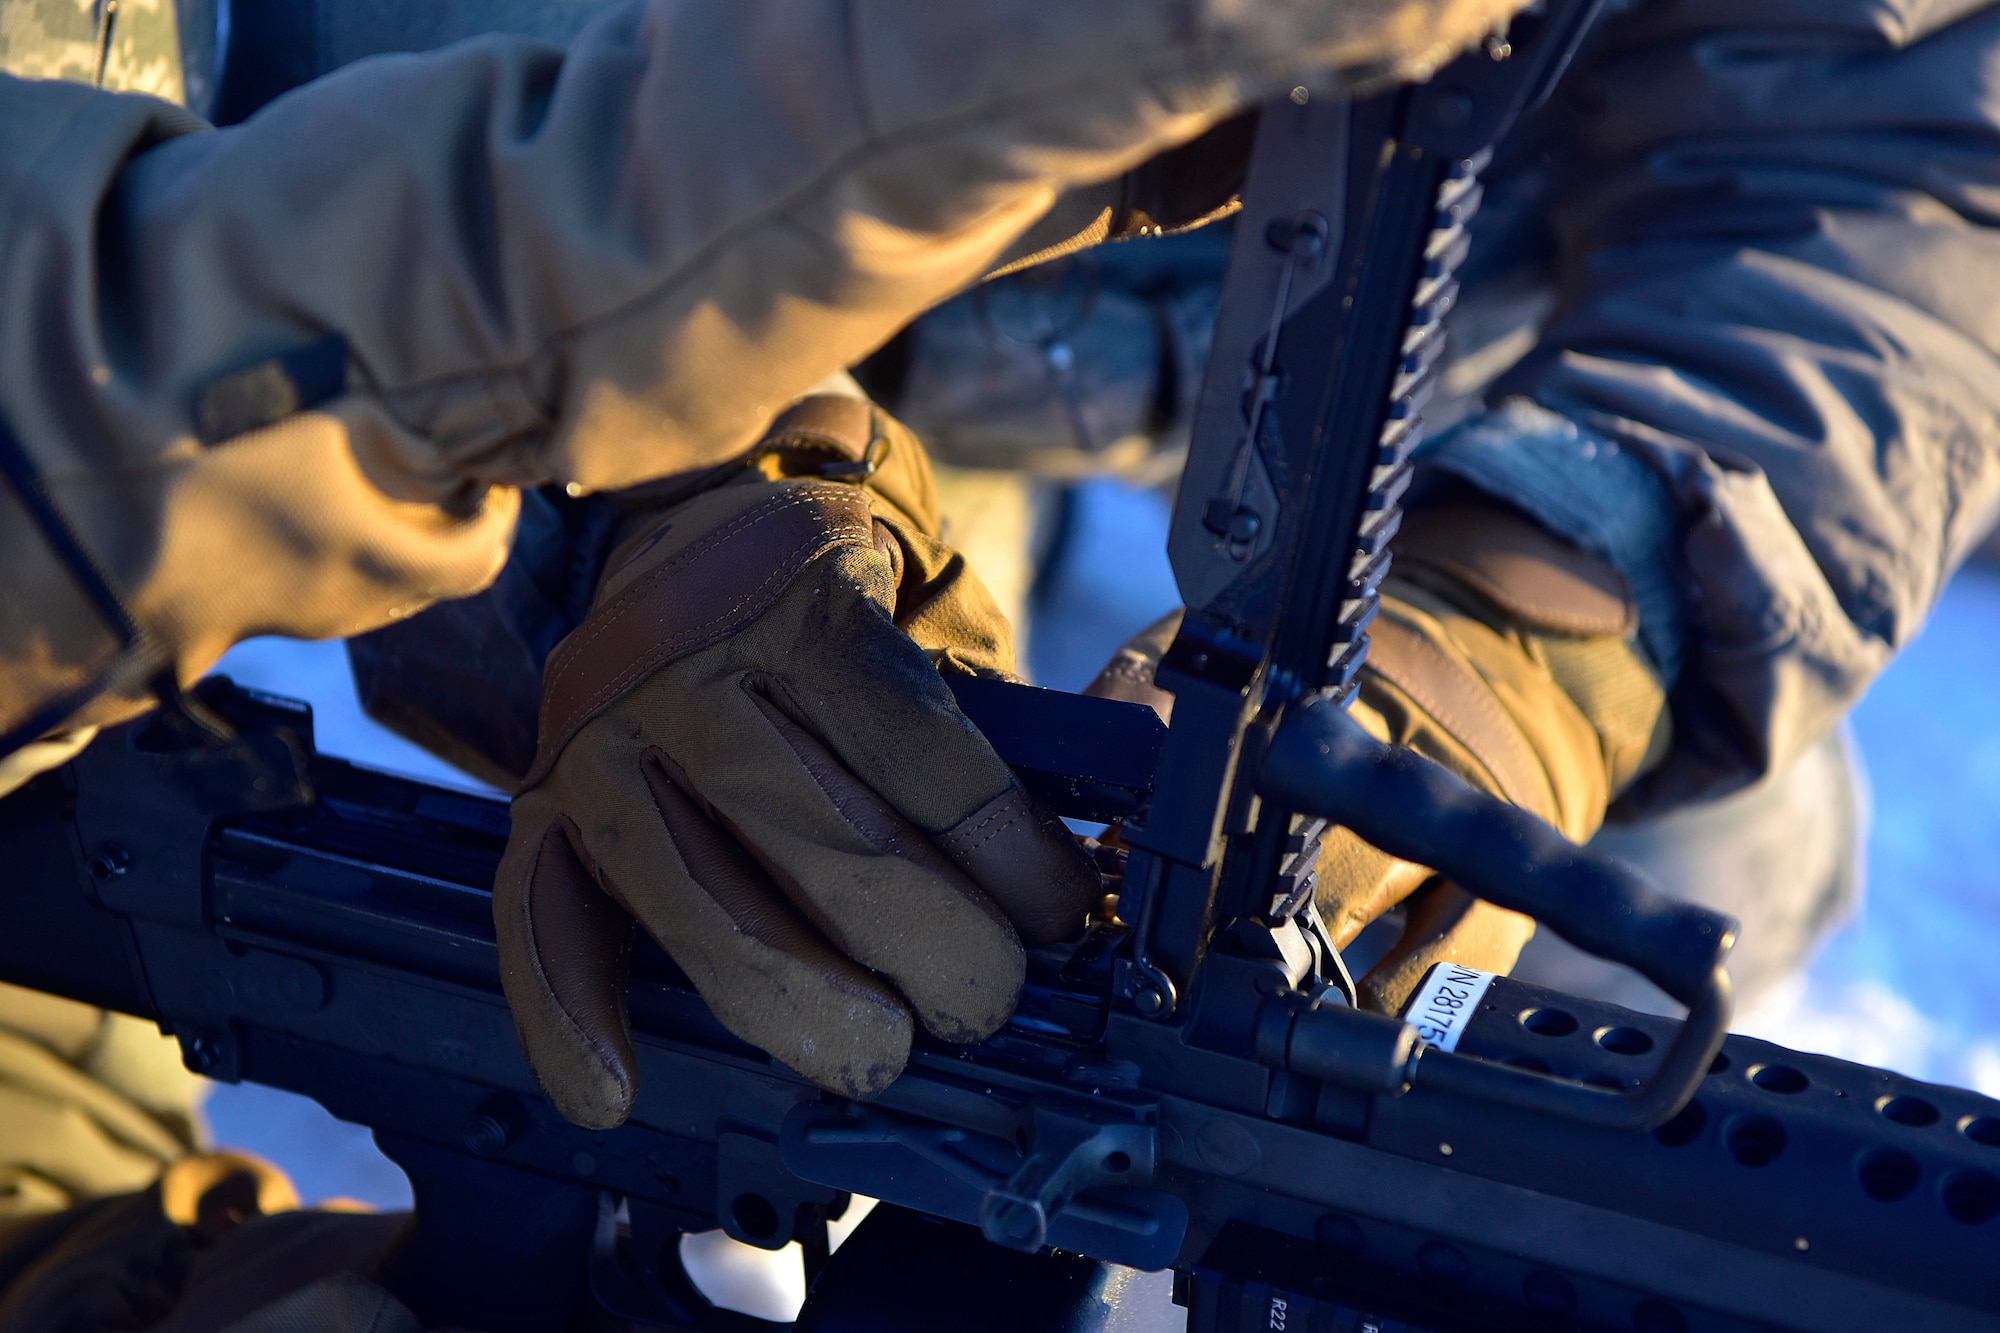 Two 354th Security Forces Squadron Airmen load a M-249 Squad Automatic Weapon with prototype cold weather gloves at Eielson Air Force Base, Alaska, Jan. 9, 2020. Even in minus 40 degrees, Security Forces Airmen must be able to use their hands to operate their weapon systems. (U.S. Air Force photo by Senior Airman Beaux Hebert)